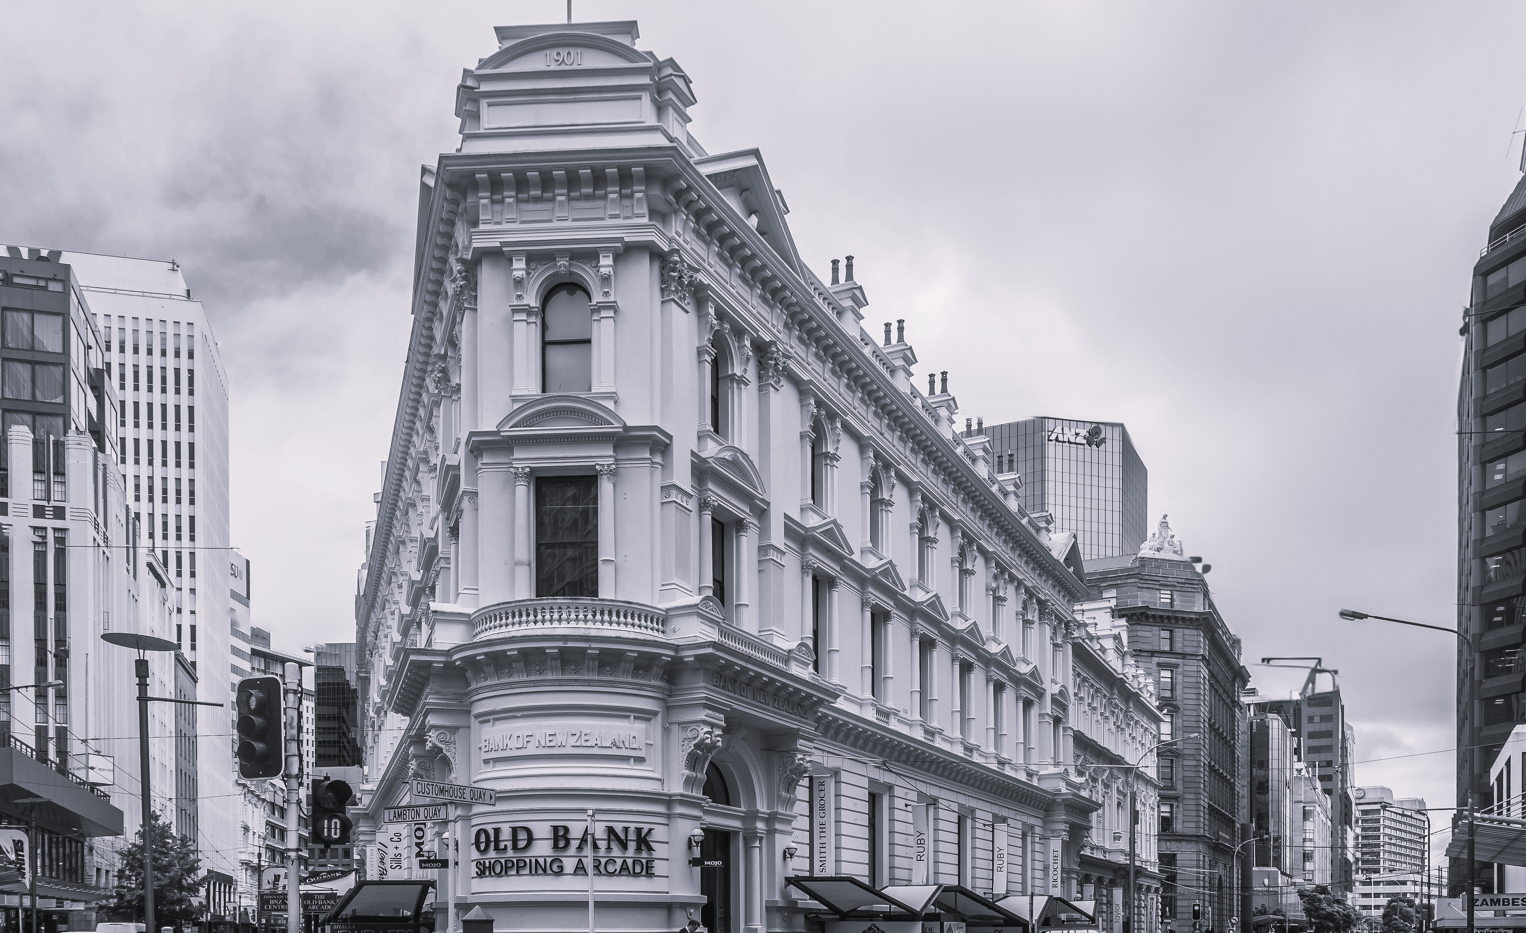 Exterior view of the Old Bank Arcade heritage building in Wellington